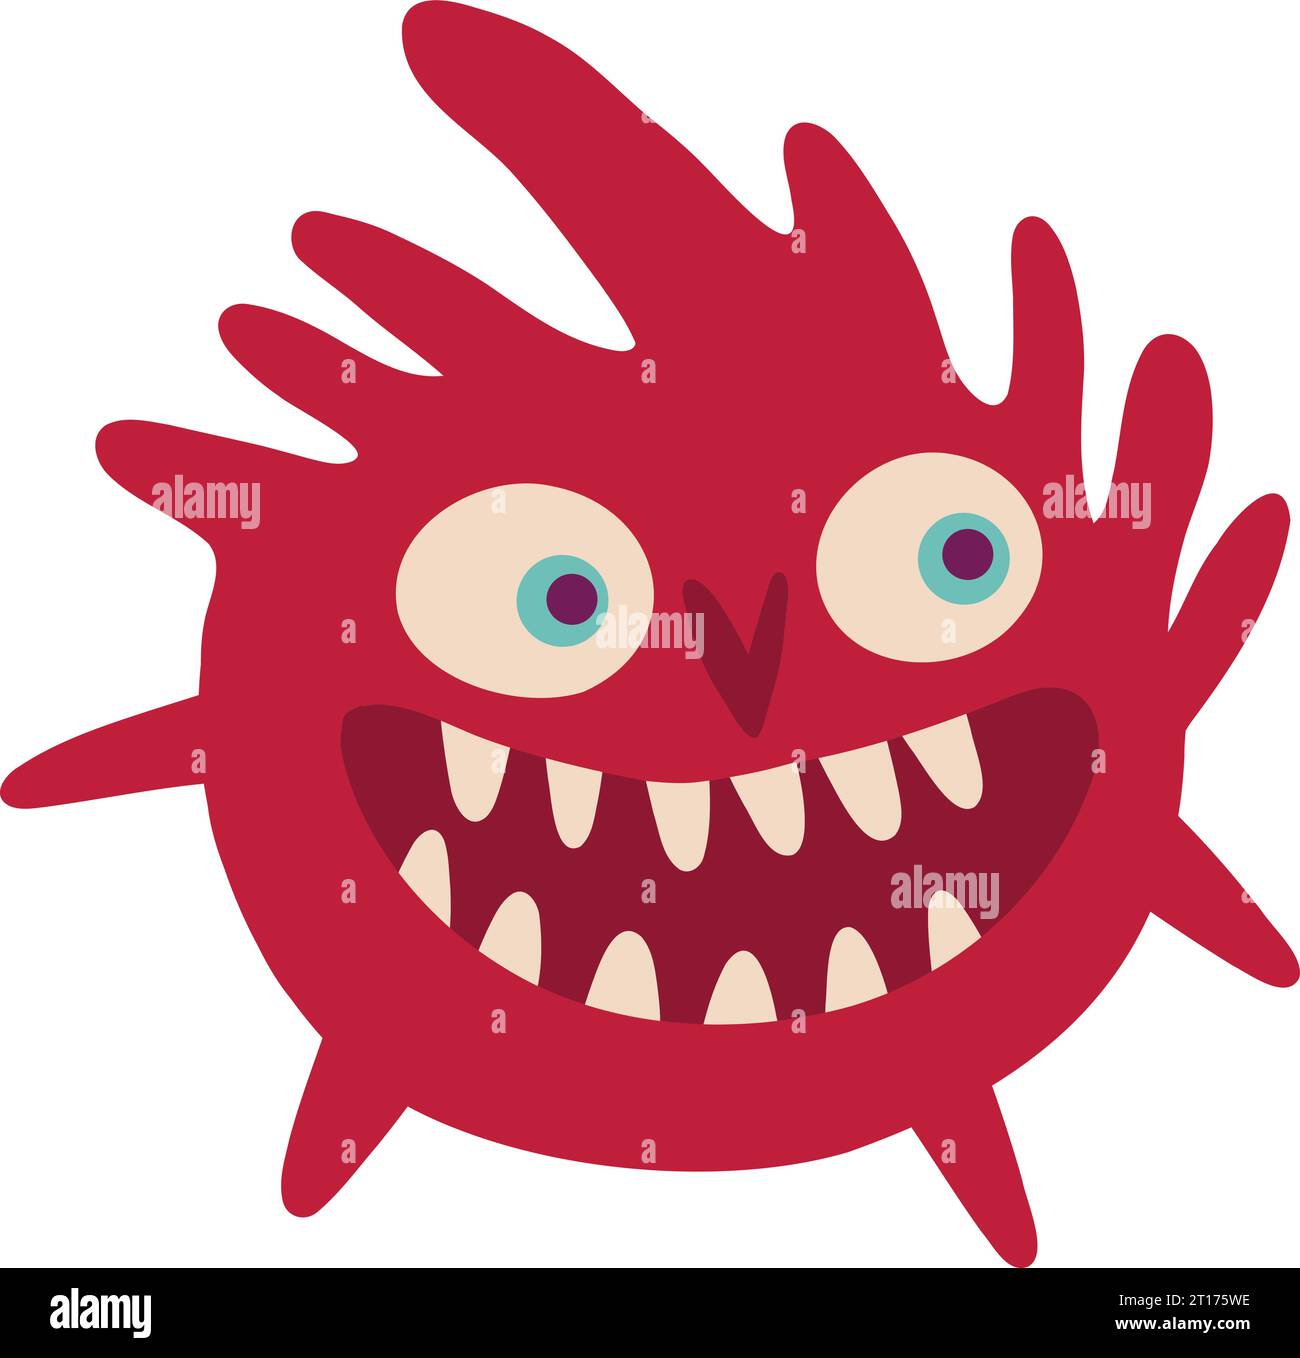 Cute funny character monster with funny smile face. Illustration in a modern childish hand-drawn style Stock Vector